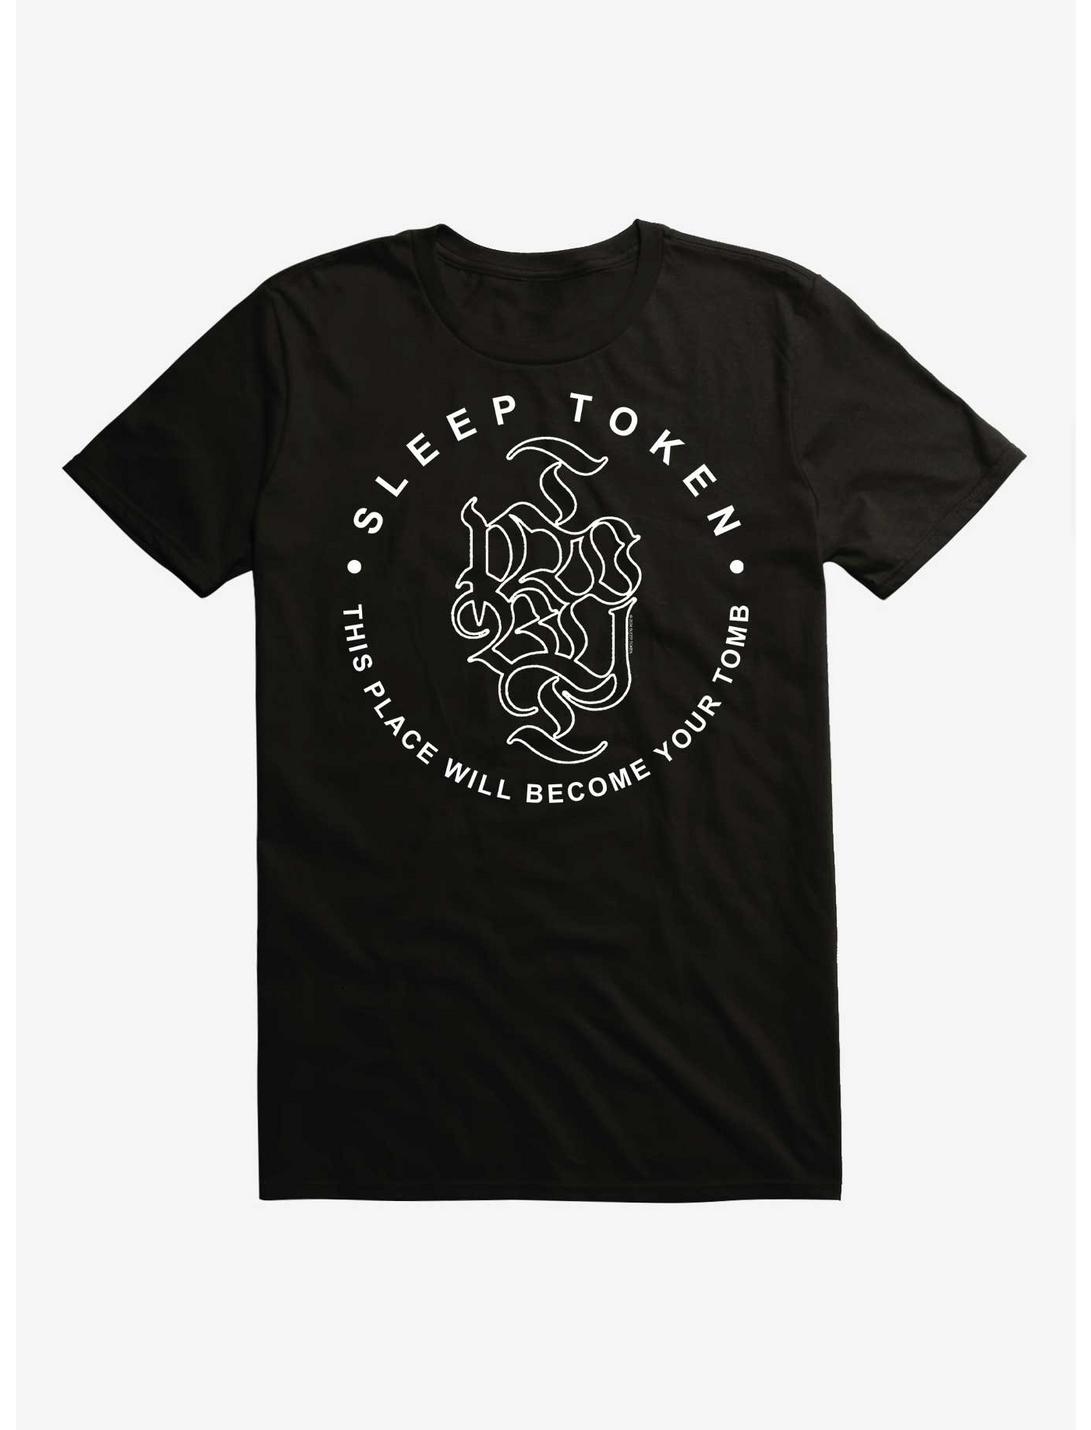 Sleep Token This Place Will Become Your Tomb T-Shirt, BLACK, hi-res